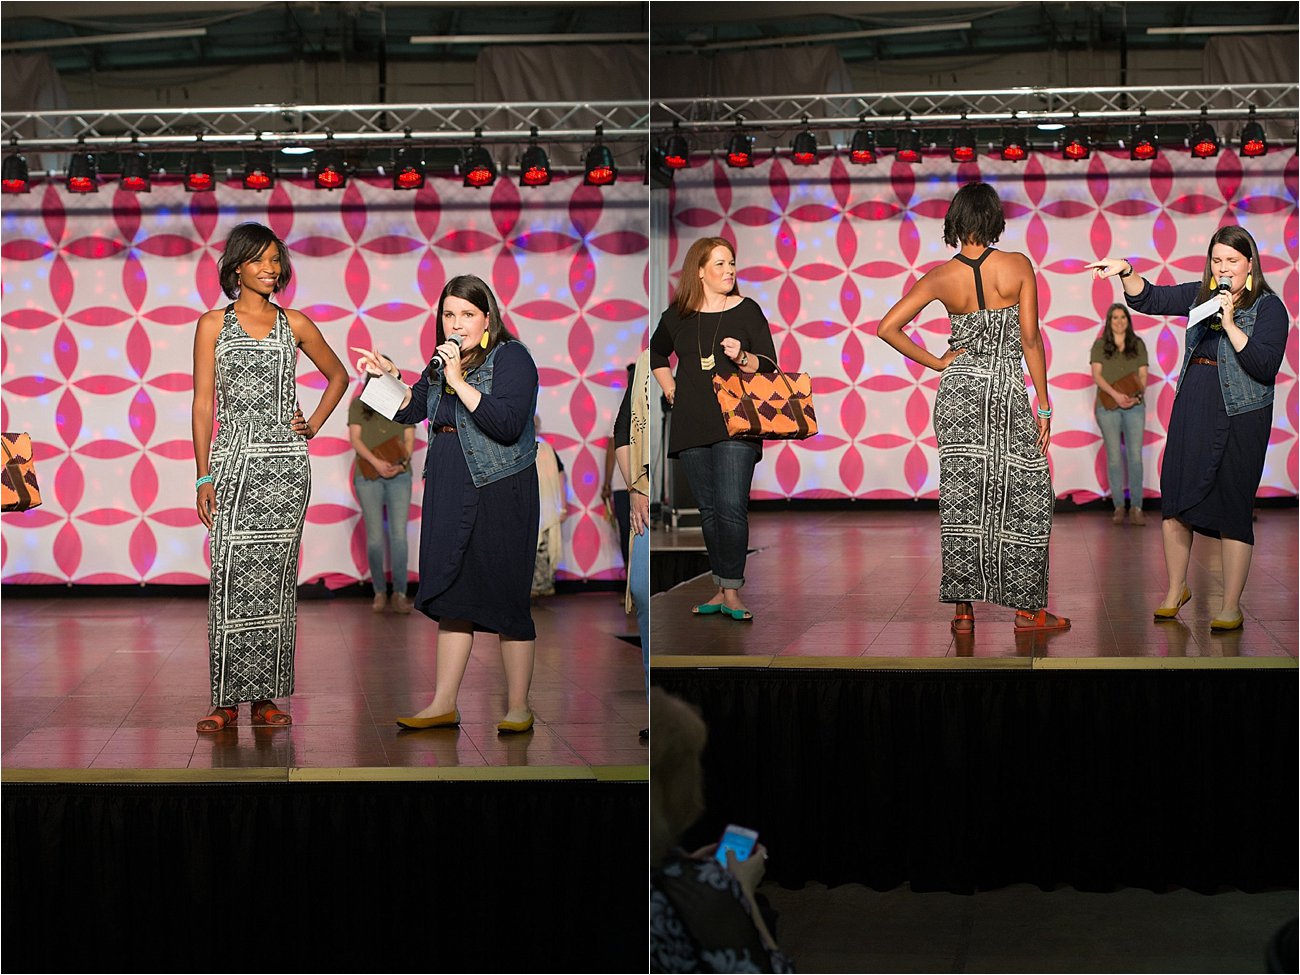 "Dressing with Purpose" Ethical Fashion Show at the Southern Women's Show in Raleigh, North Carolina 2016 | triFABB and Still Being Molly | North Carolina Fashion & Style Blogger (21)